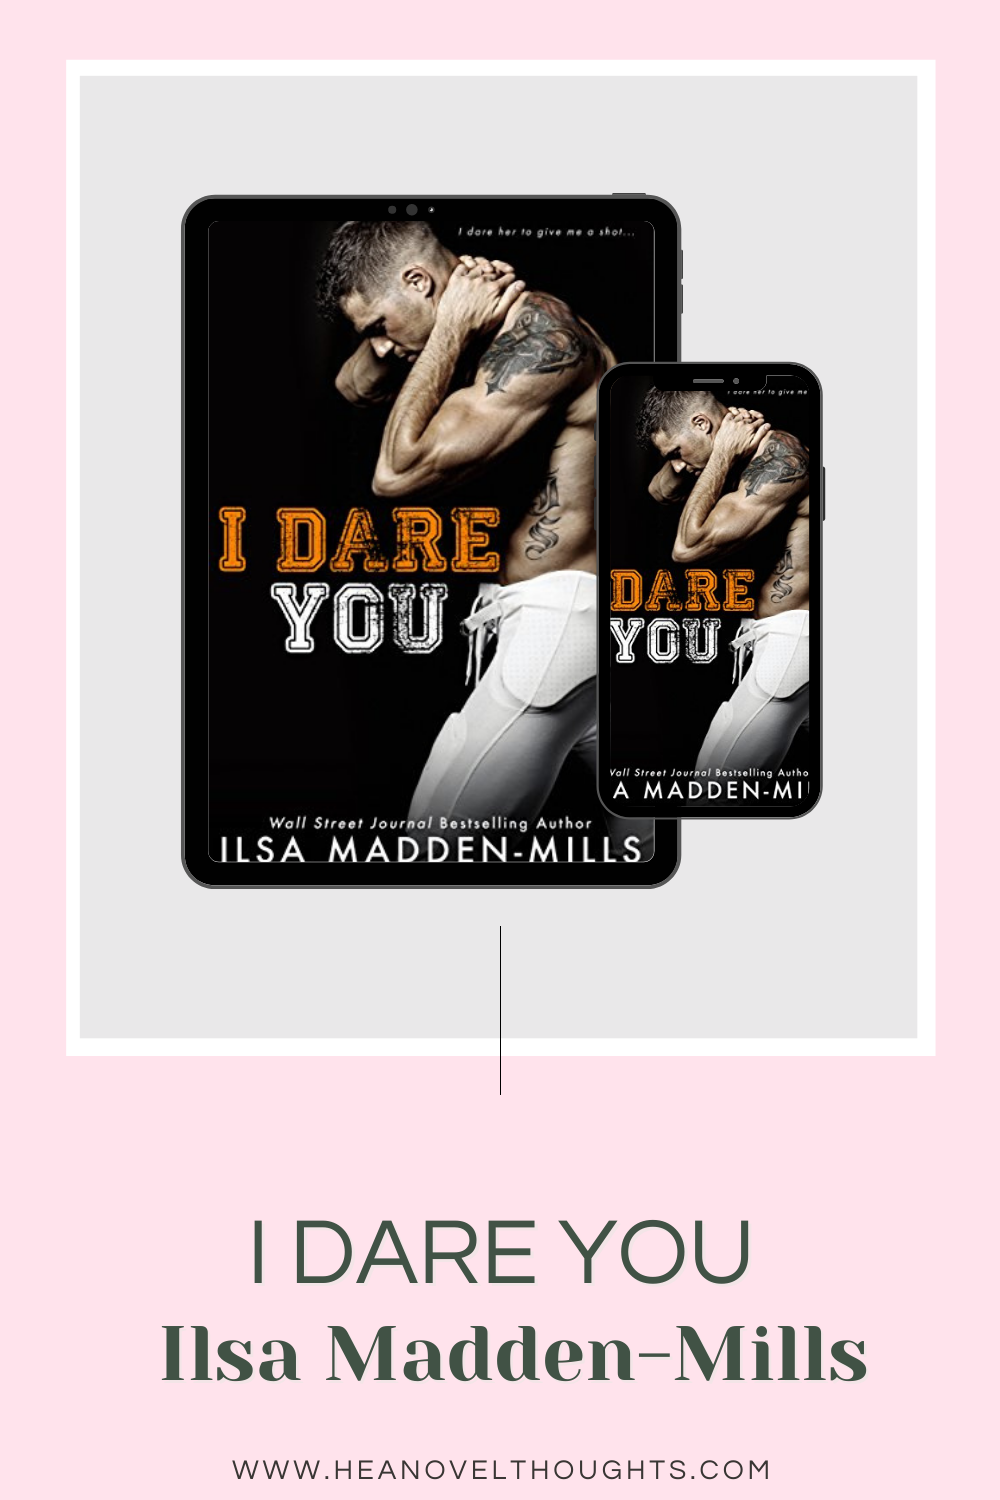 i hate you by ilsa madden mills